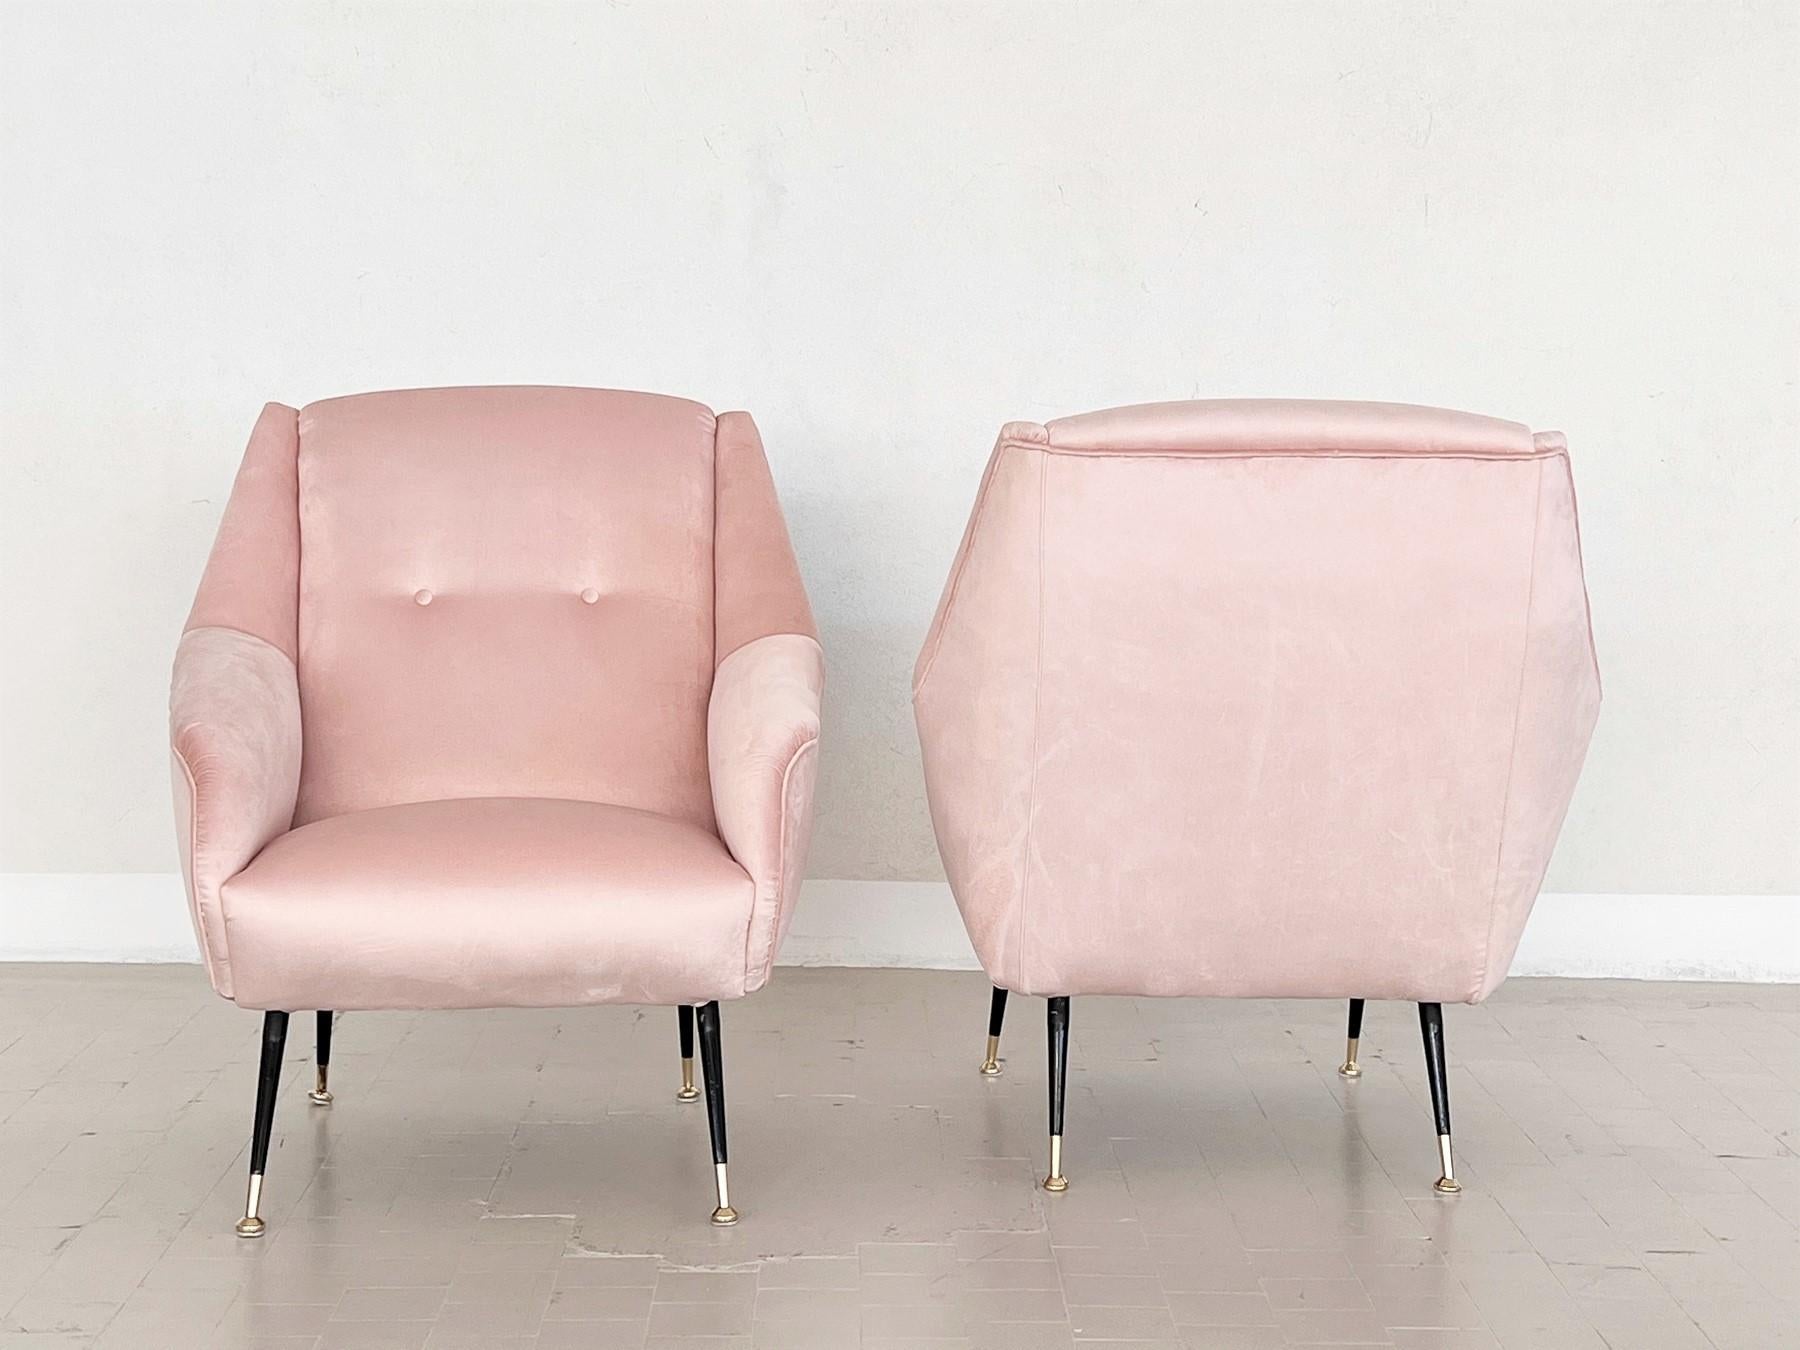 Italian Midcentury Armchairs in Soft Pink Velvet and Brass Tips, 1950s For Sale 3